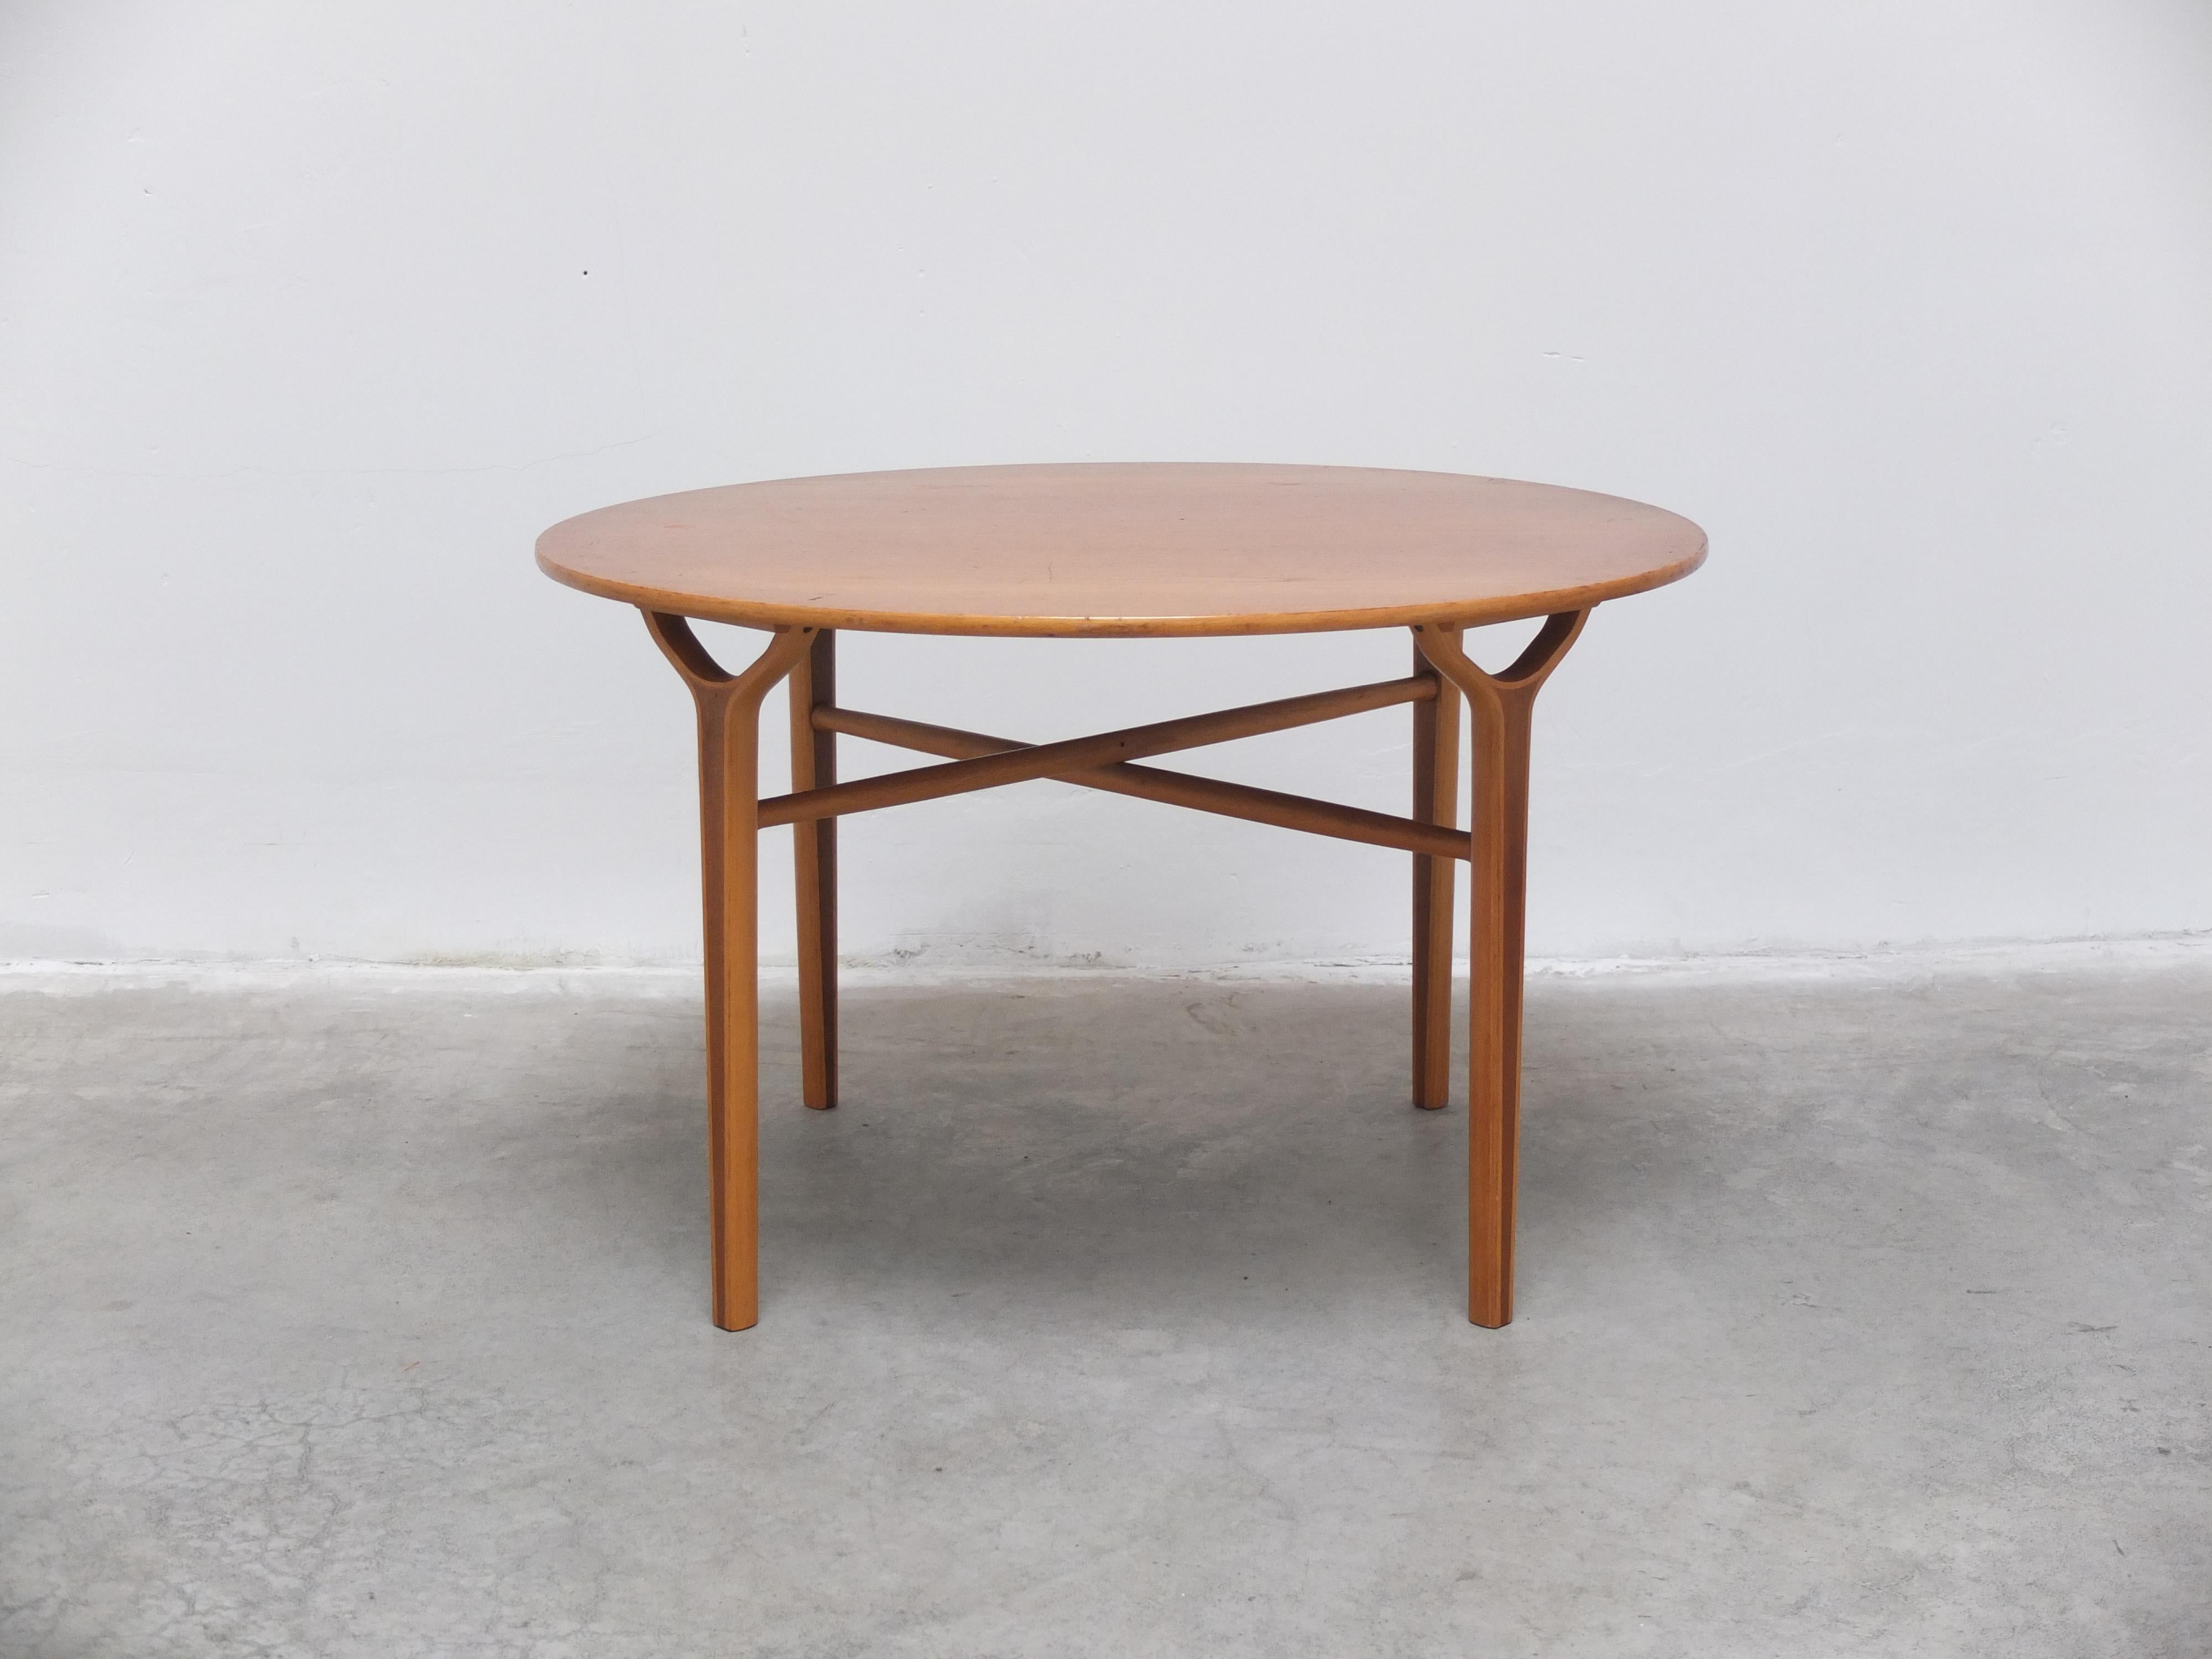 Beautiful round ‘Ax’ coffee table designed by Peter Hvidt & Orla Mølgaard-Nielsen in 1951. Made of teak wood and highly decorative thanks to the connected legs structure. Produced by Fritz Hansen in 1965 (labeled). In very good original condition